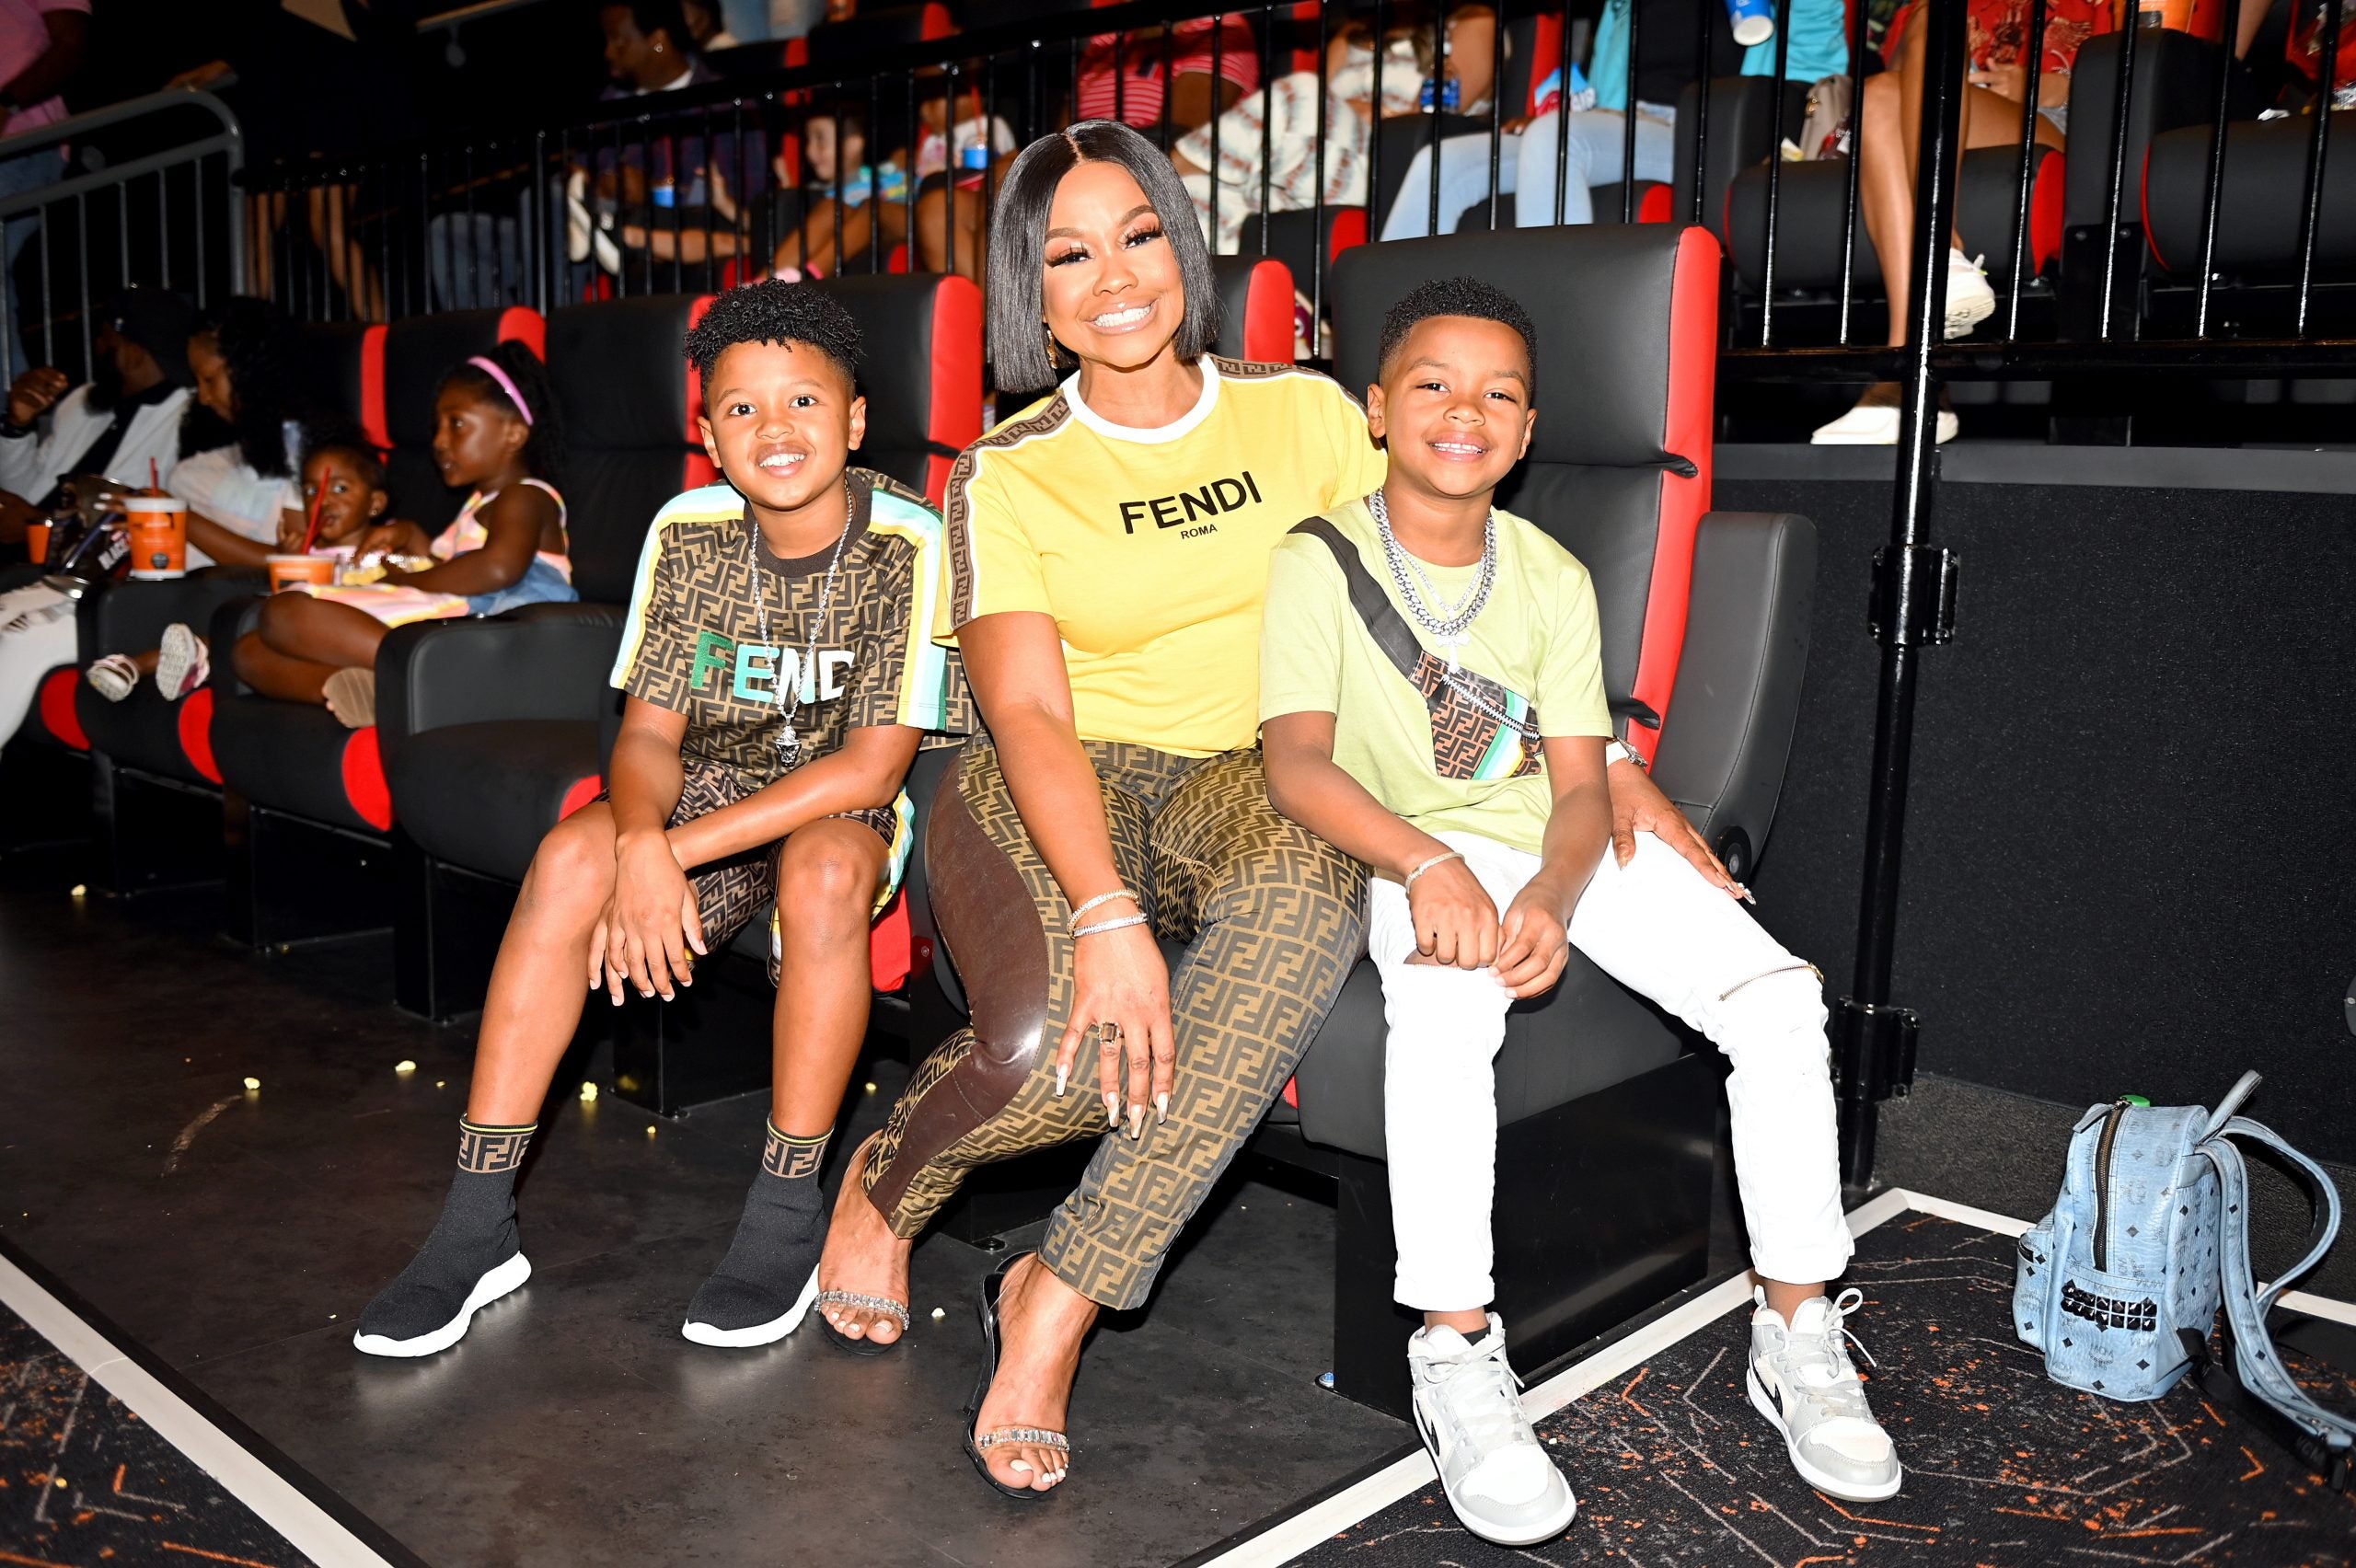 Phaedra Parks Bought Son Ayden An Investment Property For His 13th Birthday: ‘He Wanted A Dirt Bike’